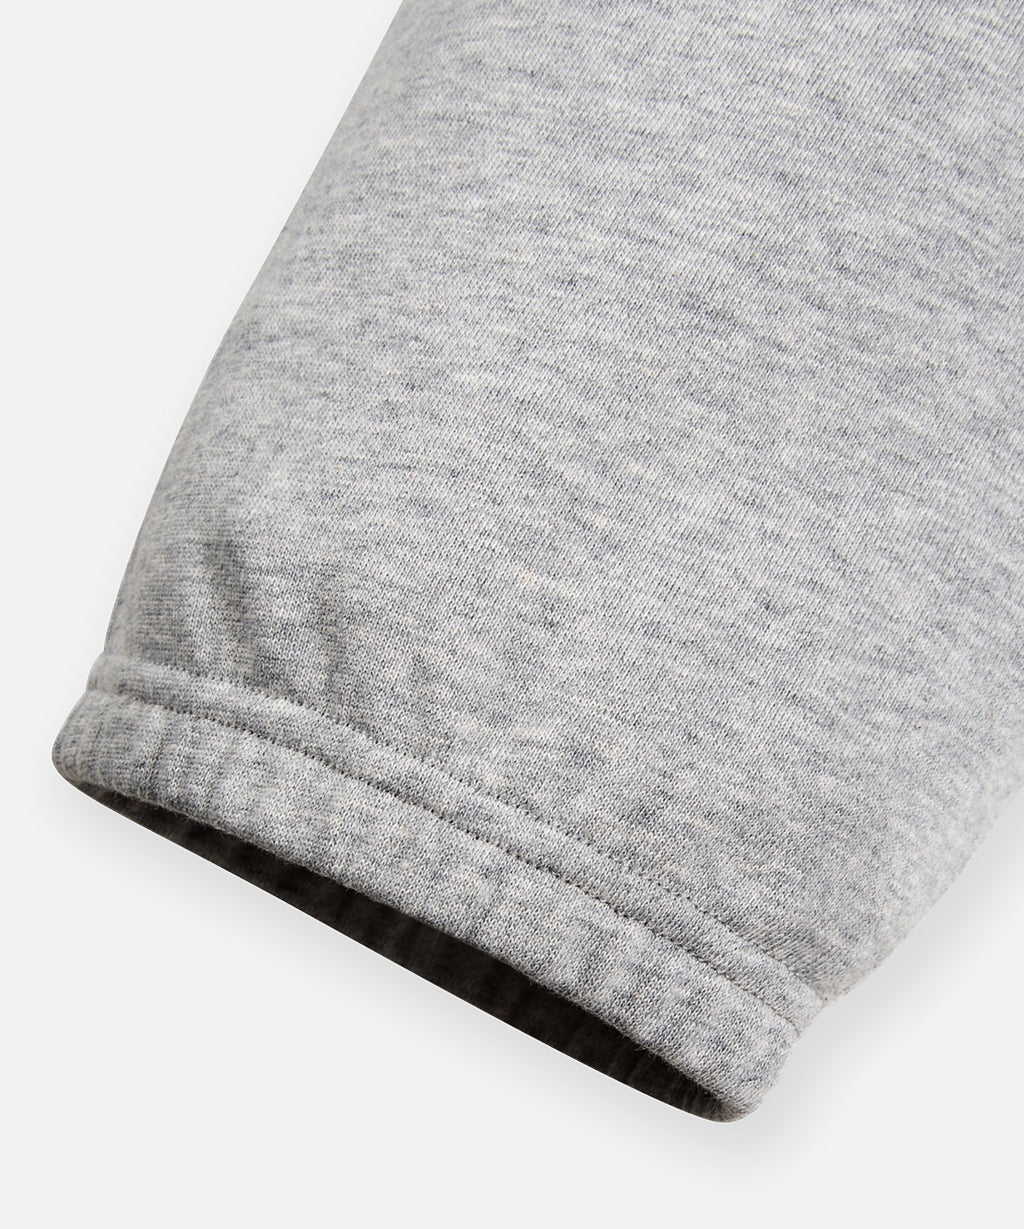  Elasticated leg opening on Paper Planes Crest Sweatpant, color Heather Grey.